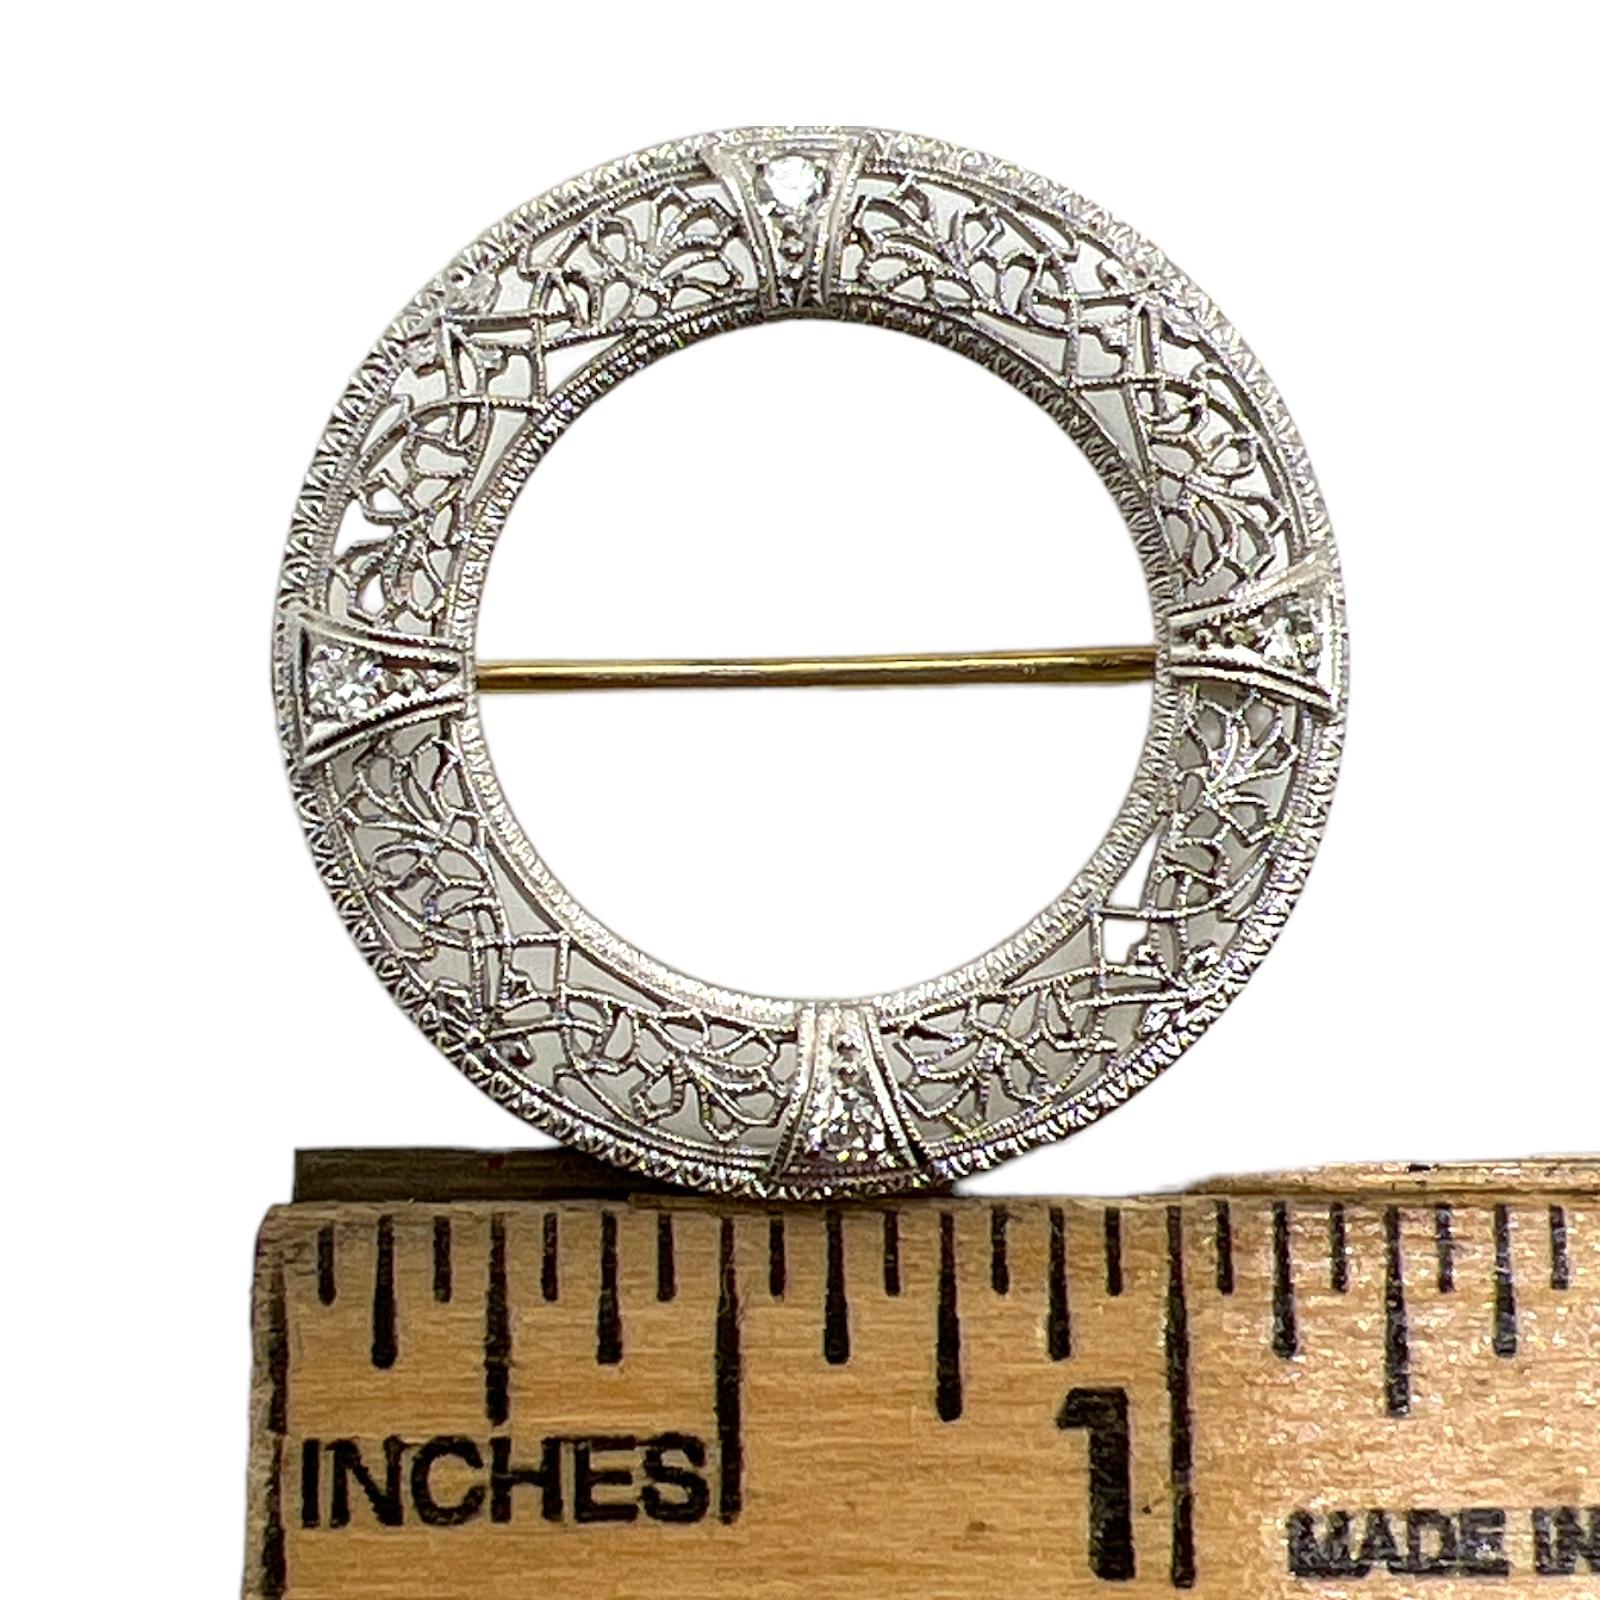 Art Deco filgree diamond vintage brooch fashioned in 14 karat yellow and white gold. The round brooch features 4 Old European cut diamonds weighing approximately .20 CTW and graded G-H color and SI clarity. The brooch is handcrafted with beautiful